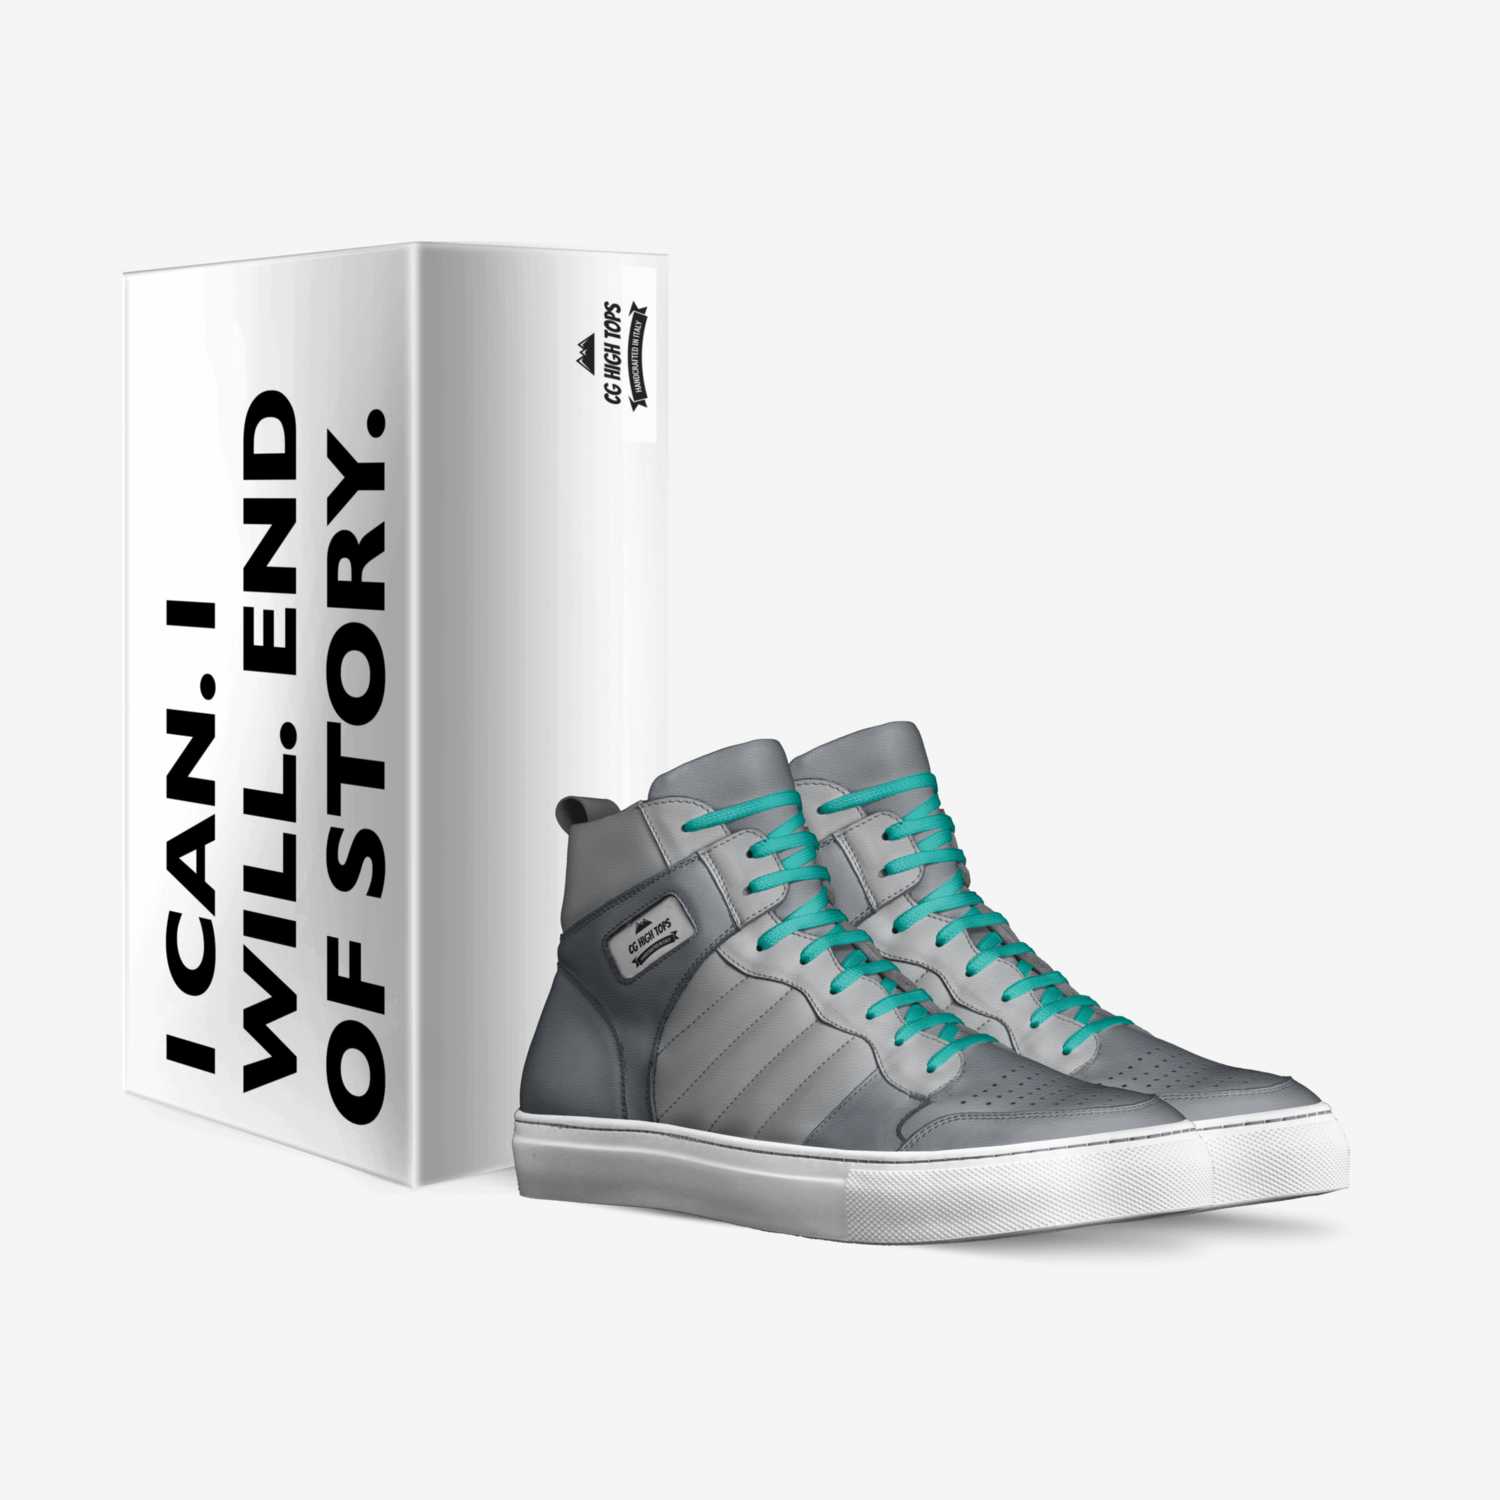 CG HIGH TOPS custom made in Italy shoes by Connor Gwilliam | Box view